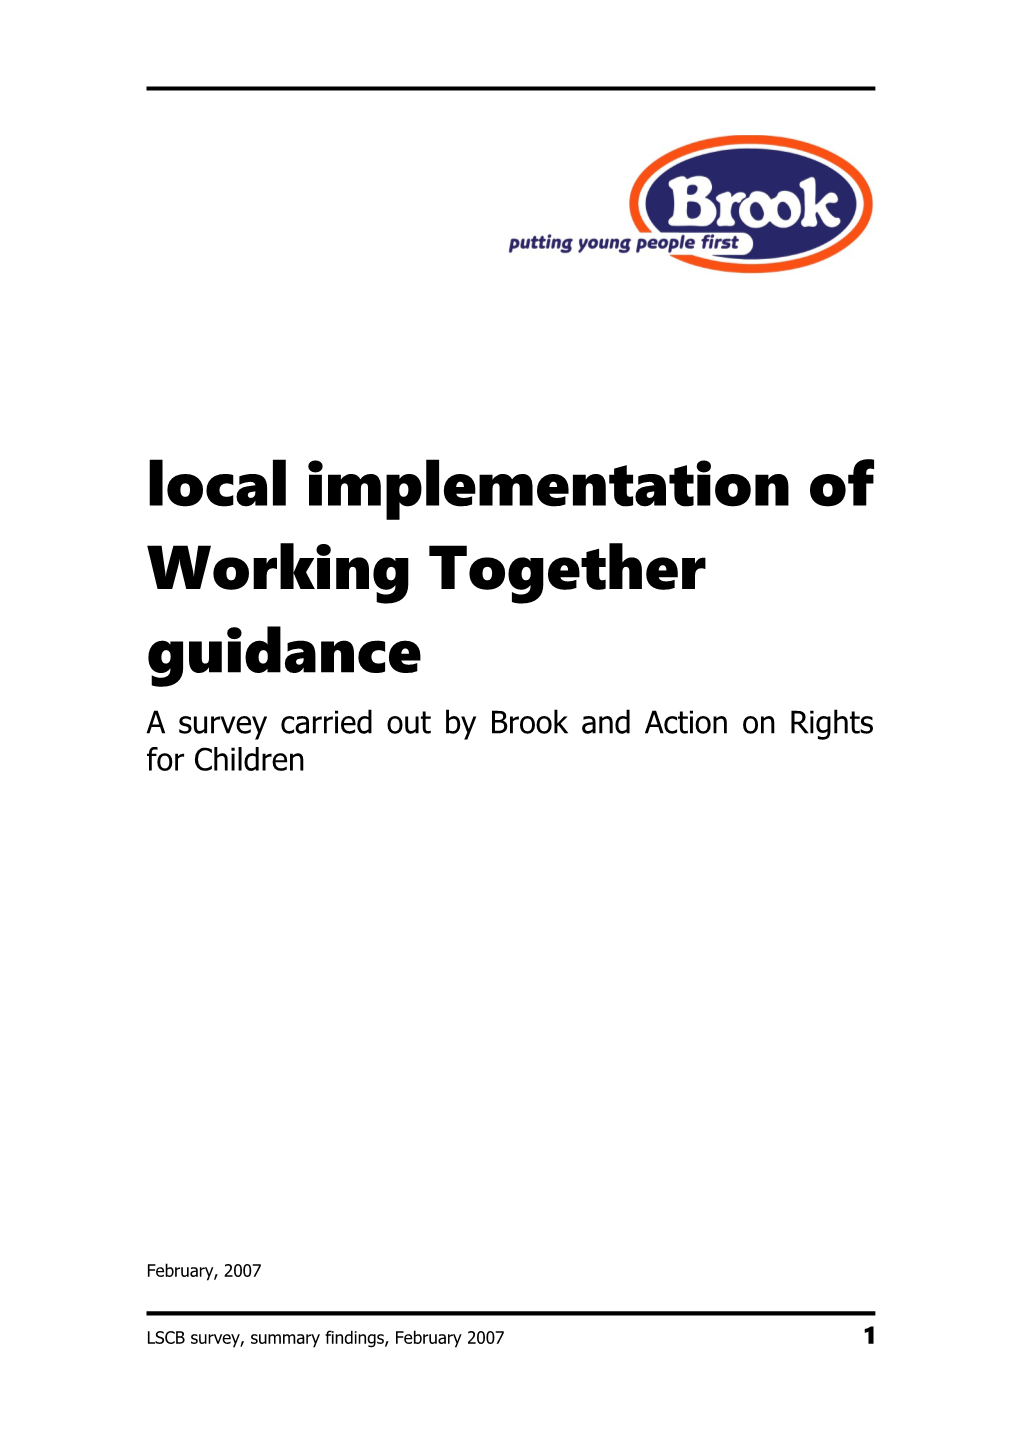 Local Implementation of Working Together Guidance